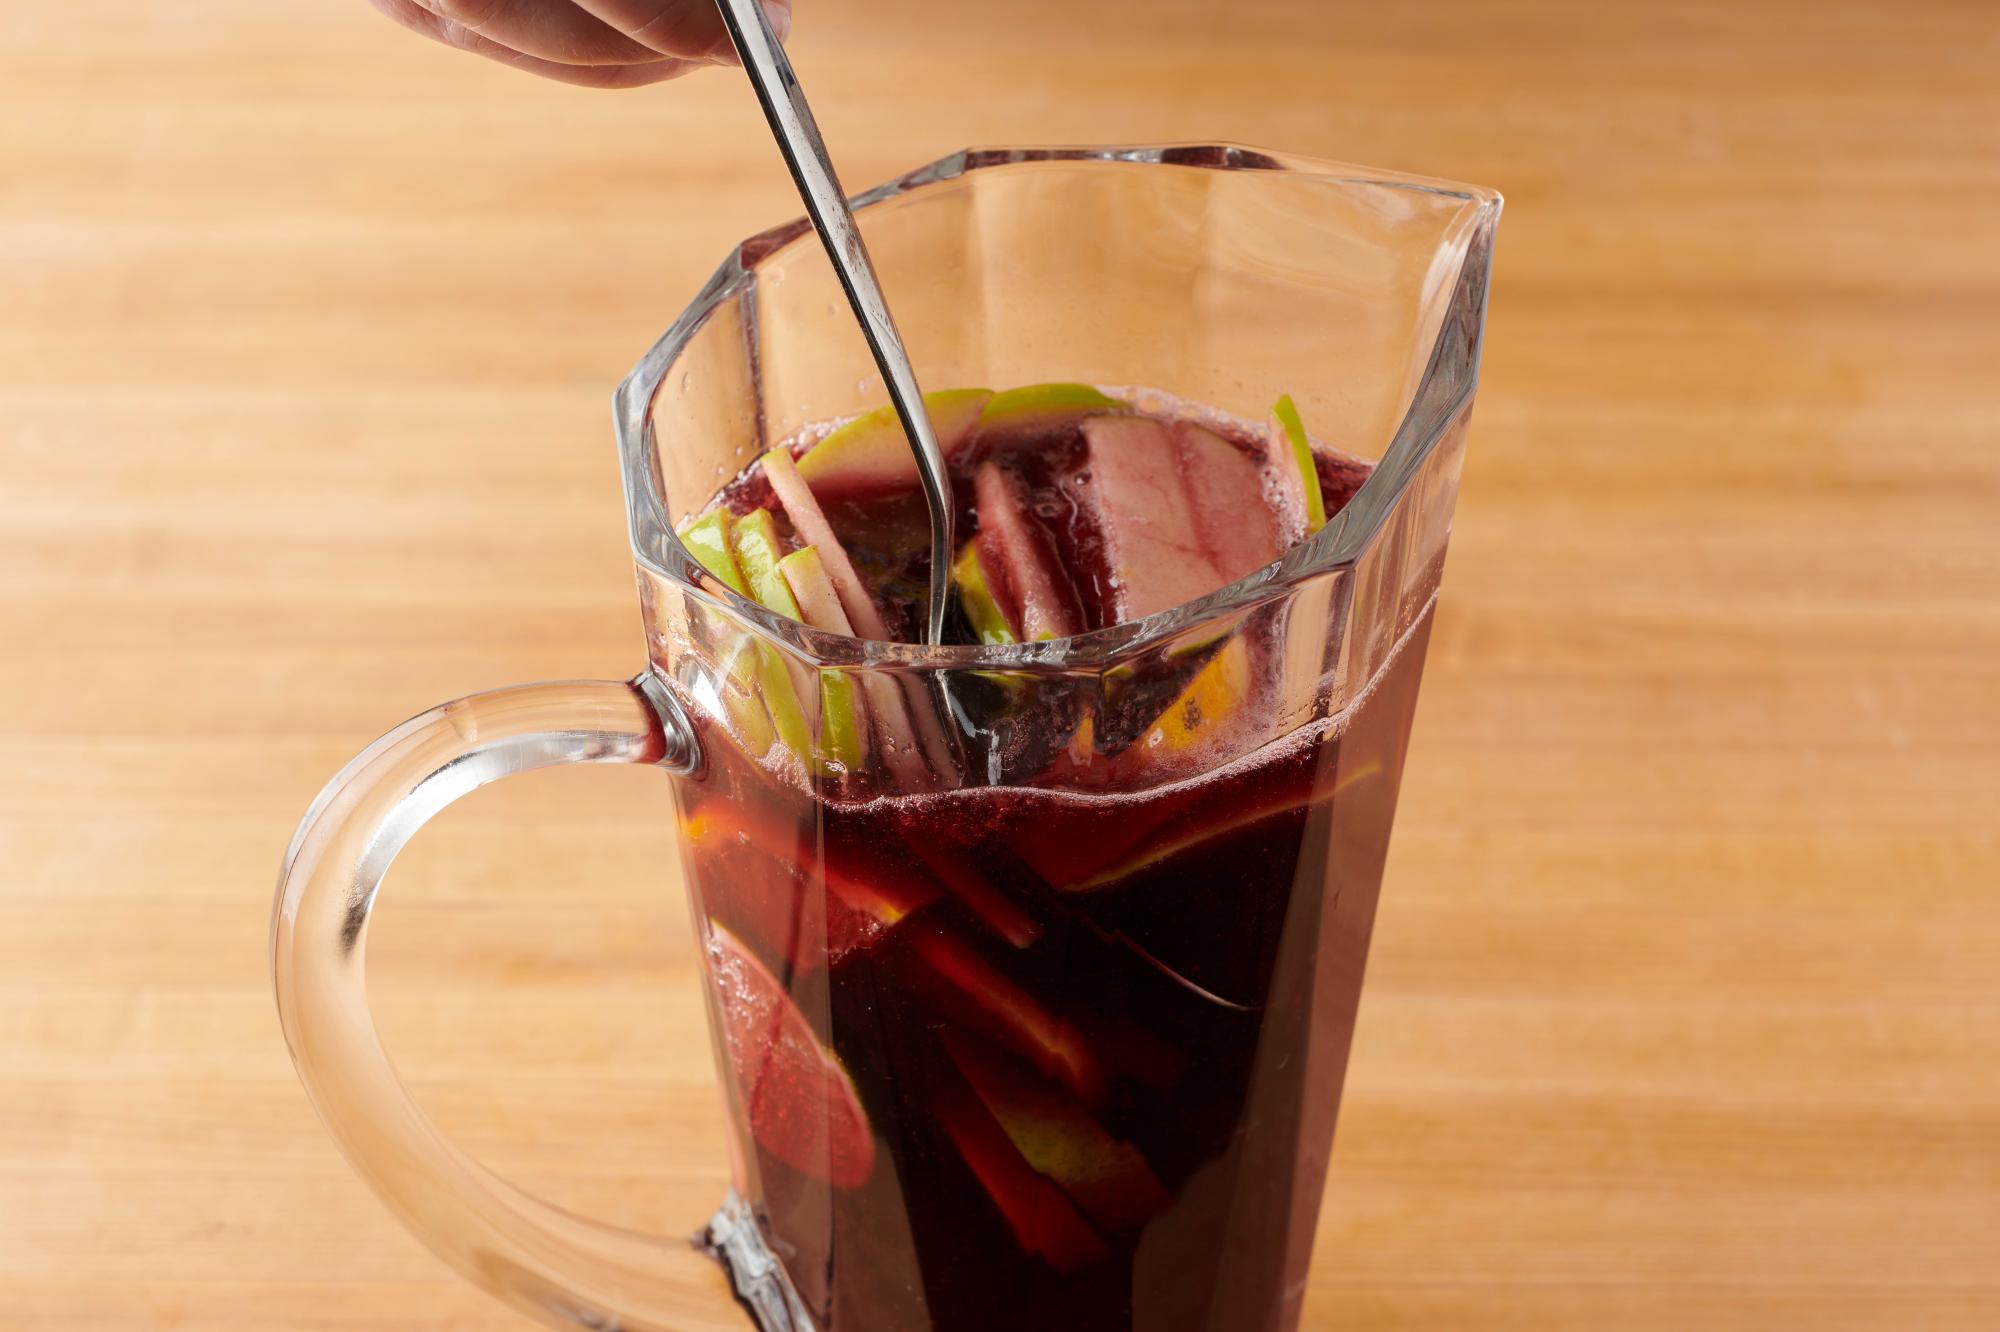 Stir the Sangria with a large spoon.